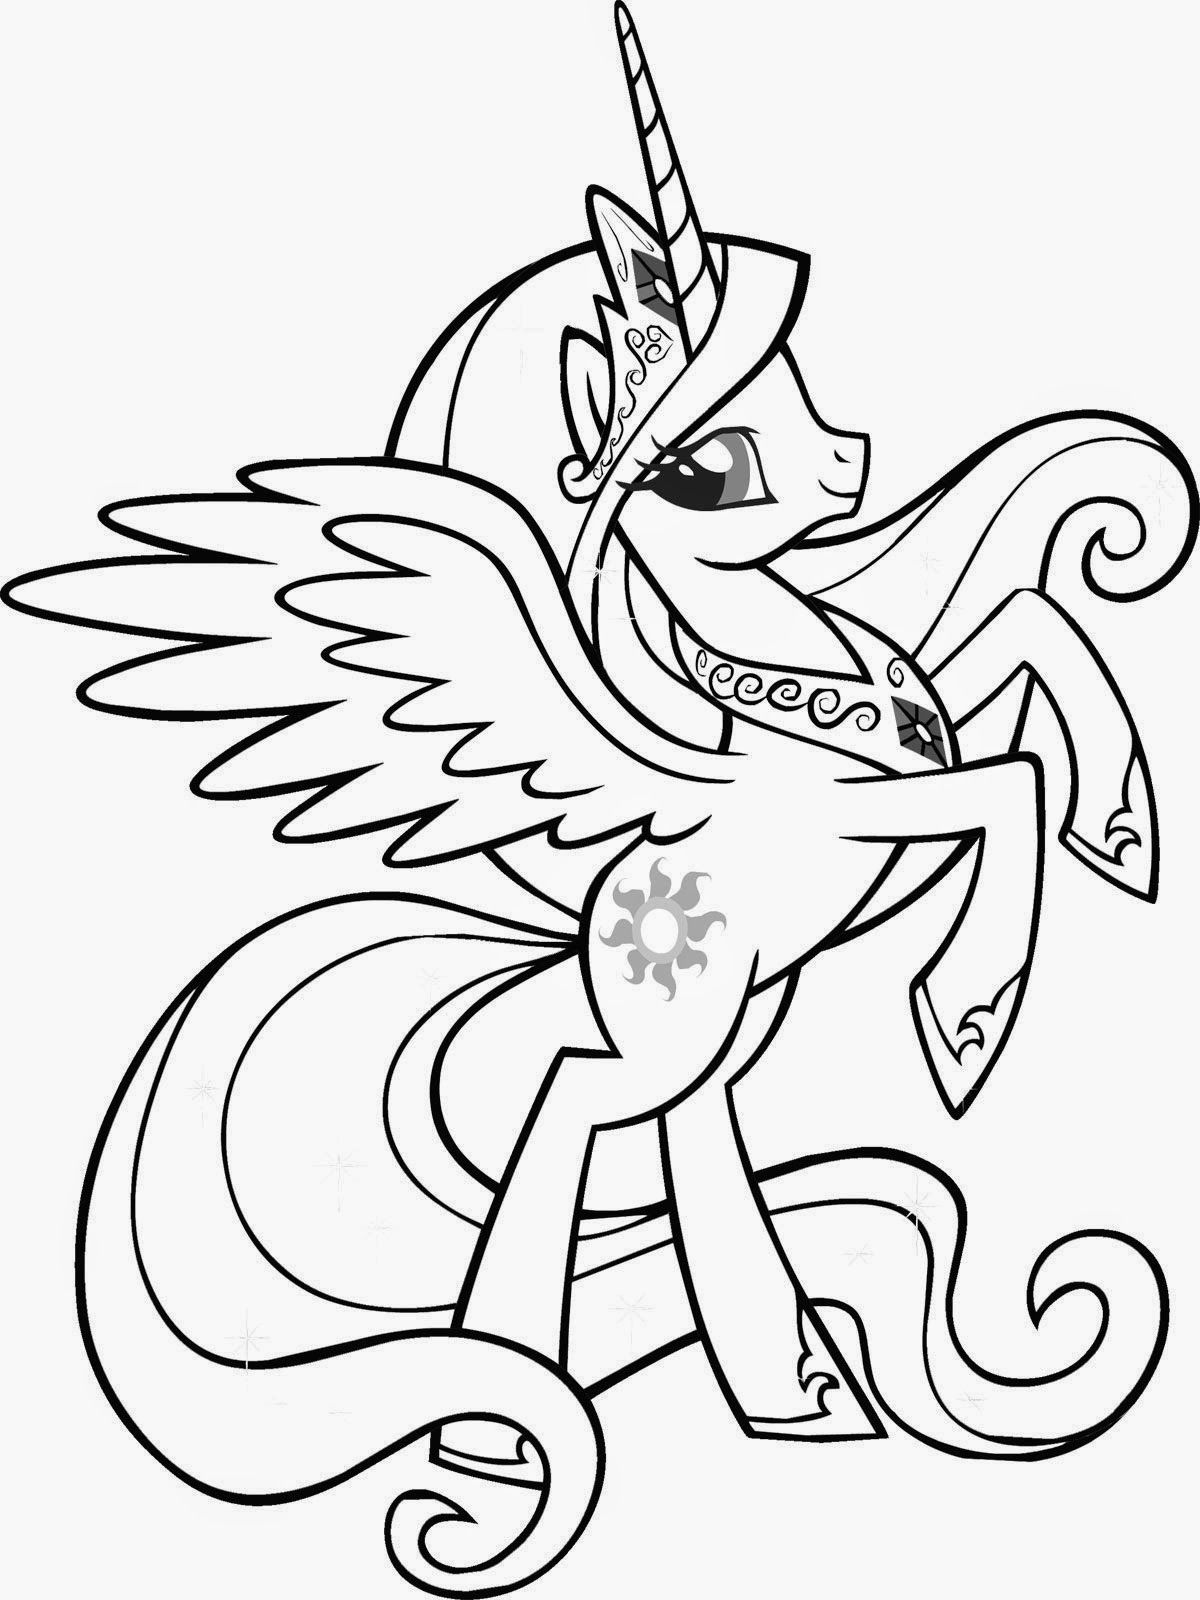 Unicorn Coloring Pages Online - Coloring Home